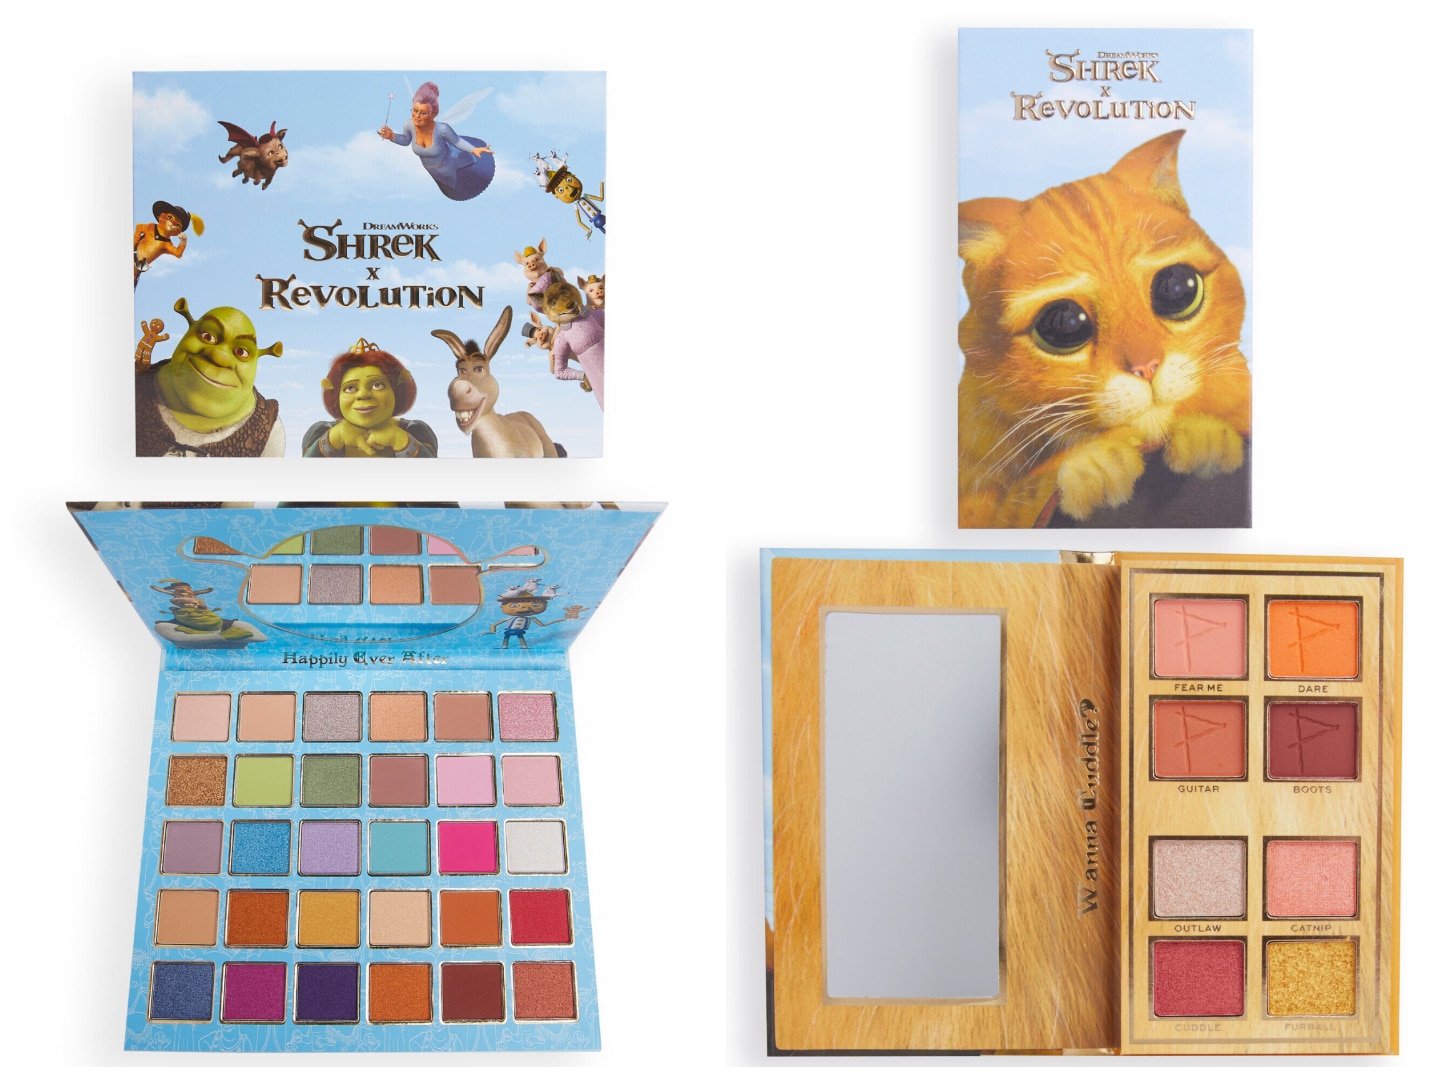 The Shrek x Revolution Beauty collaboration features palettes with shades inspired by the film series.